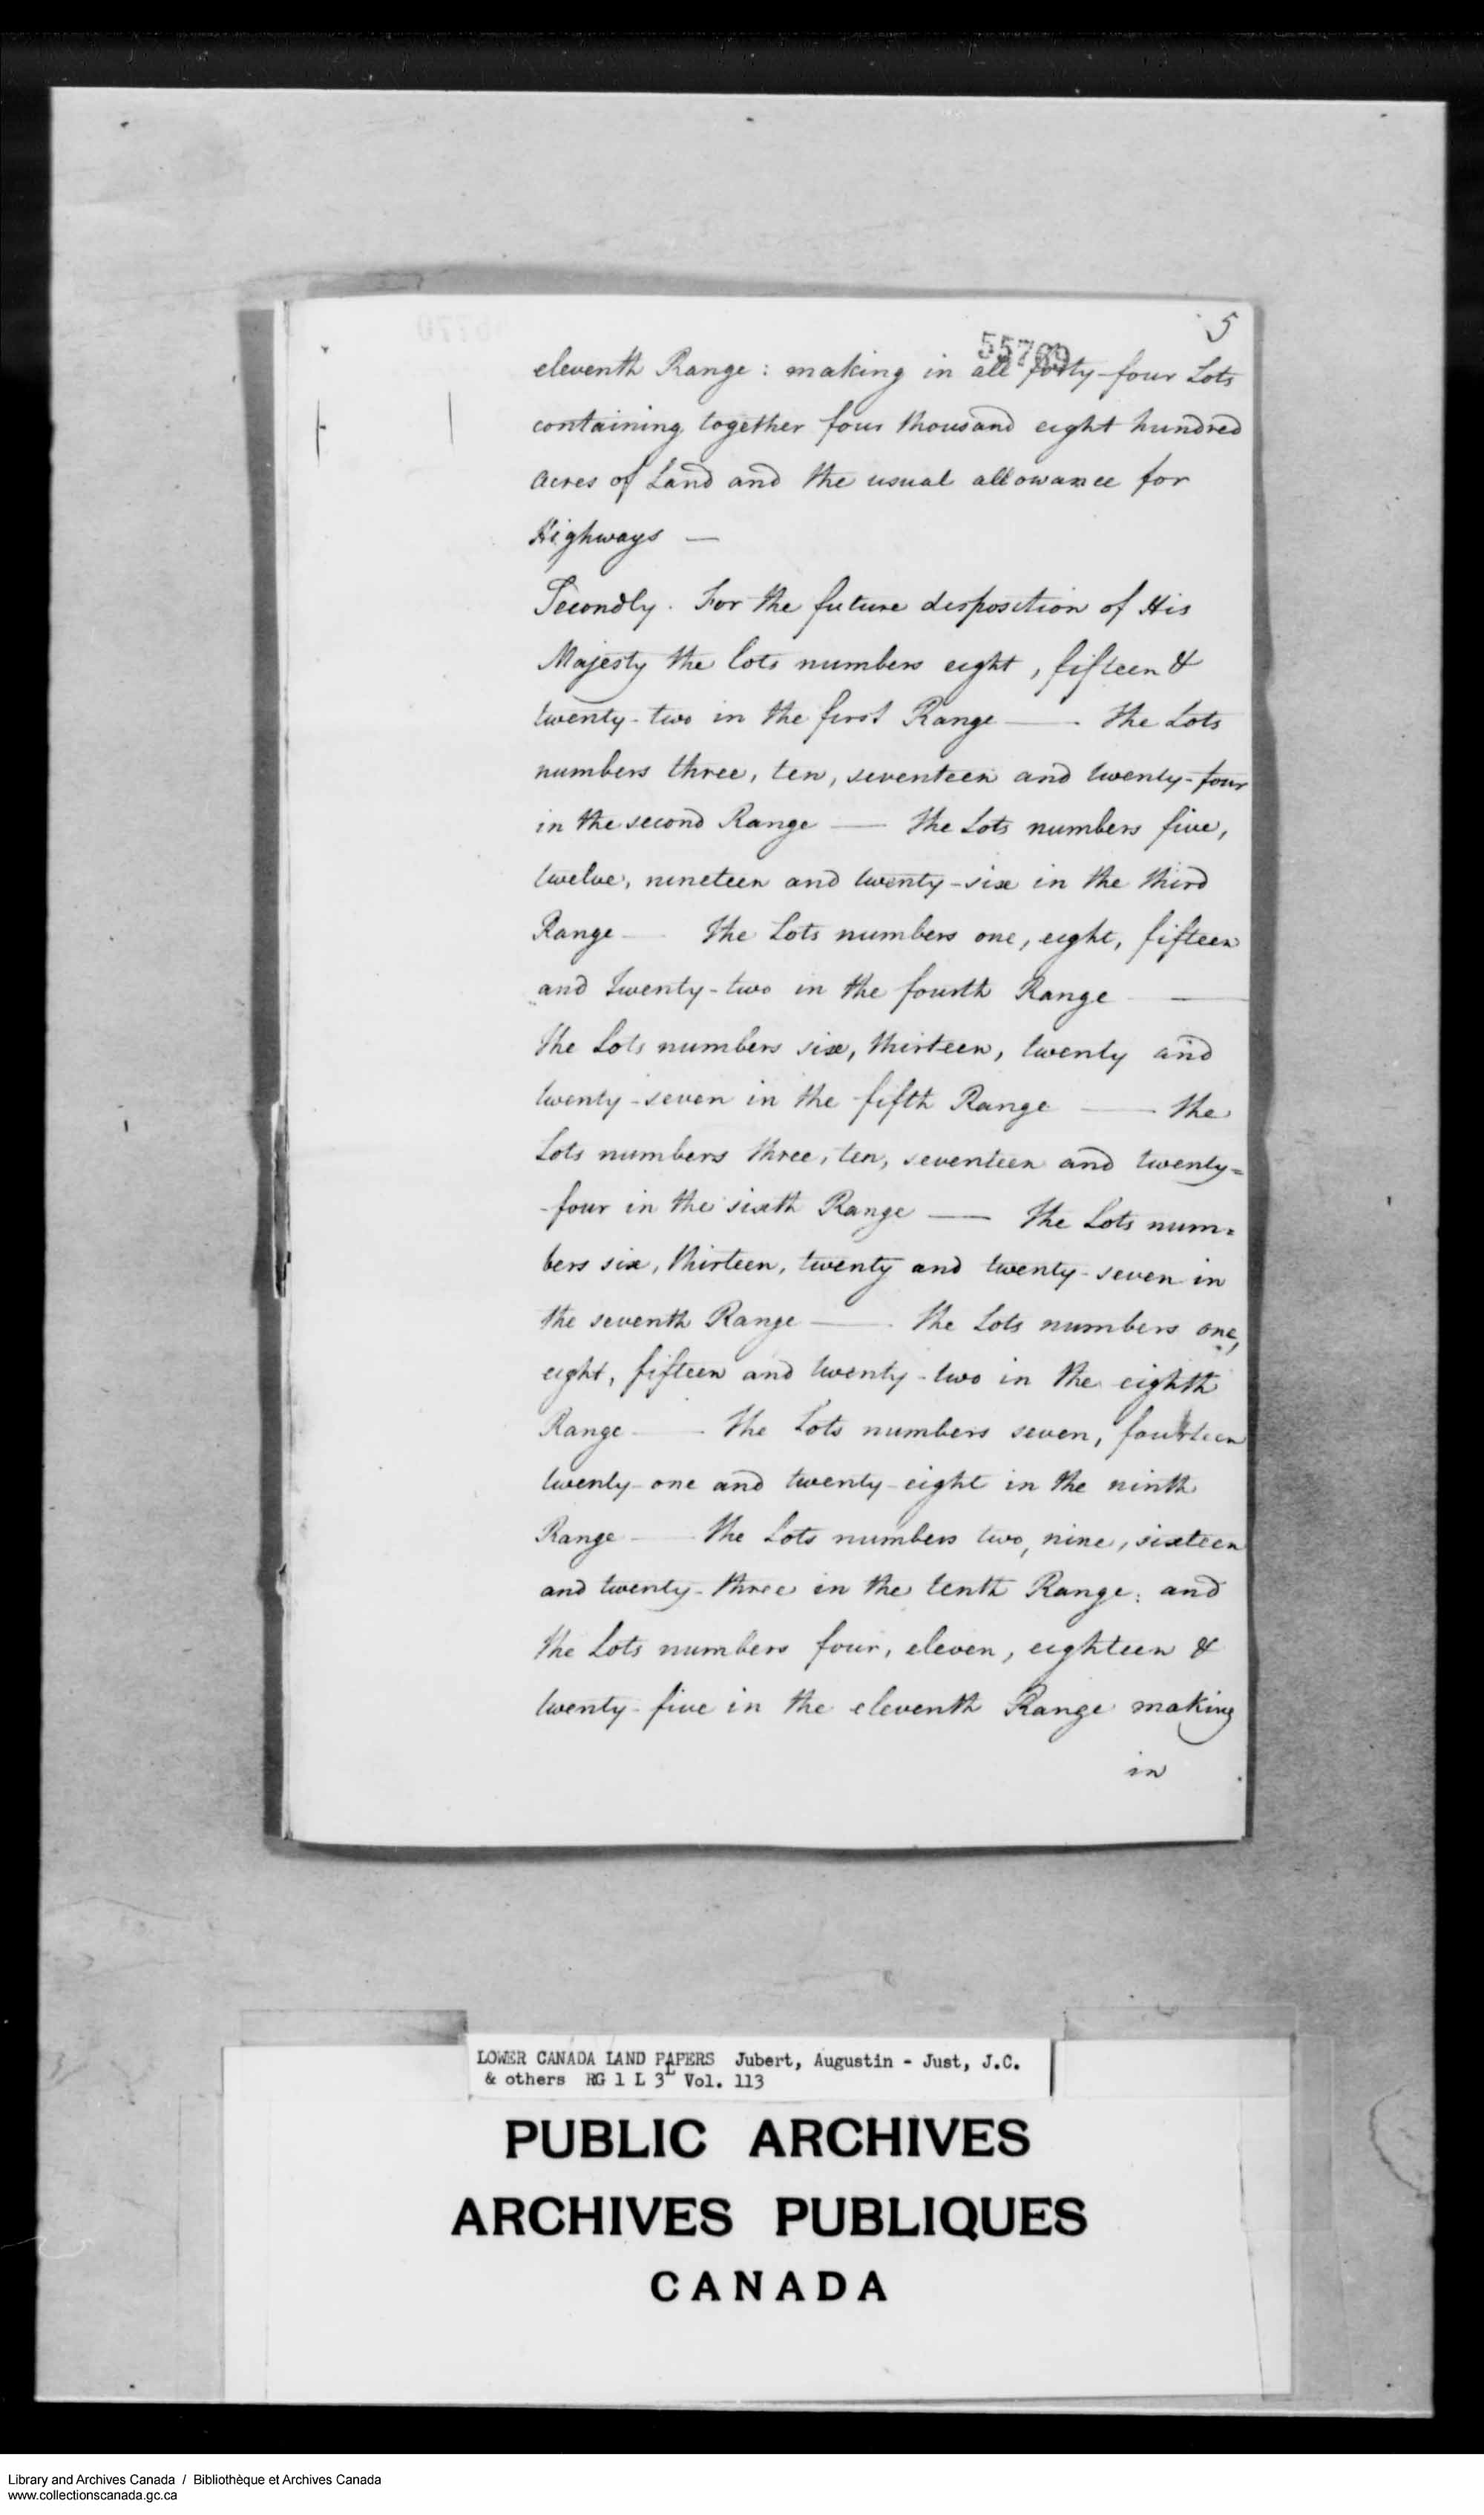 Digitized page of  for Image No.: e008700257